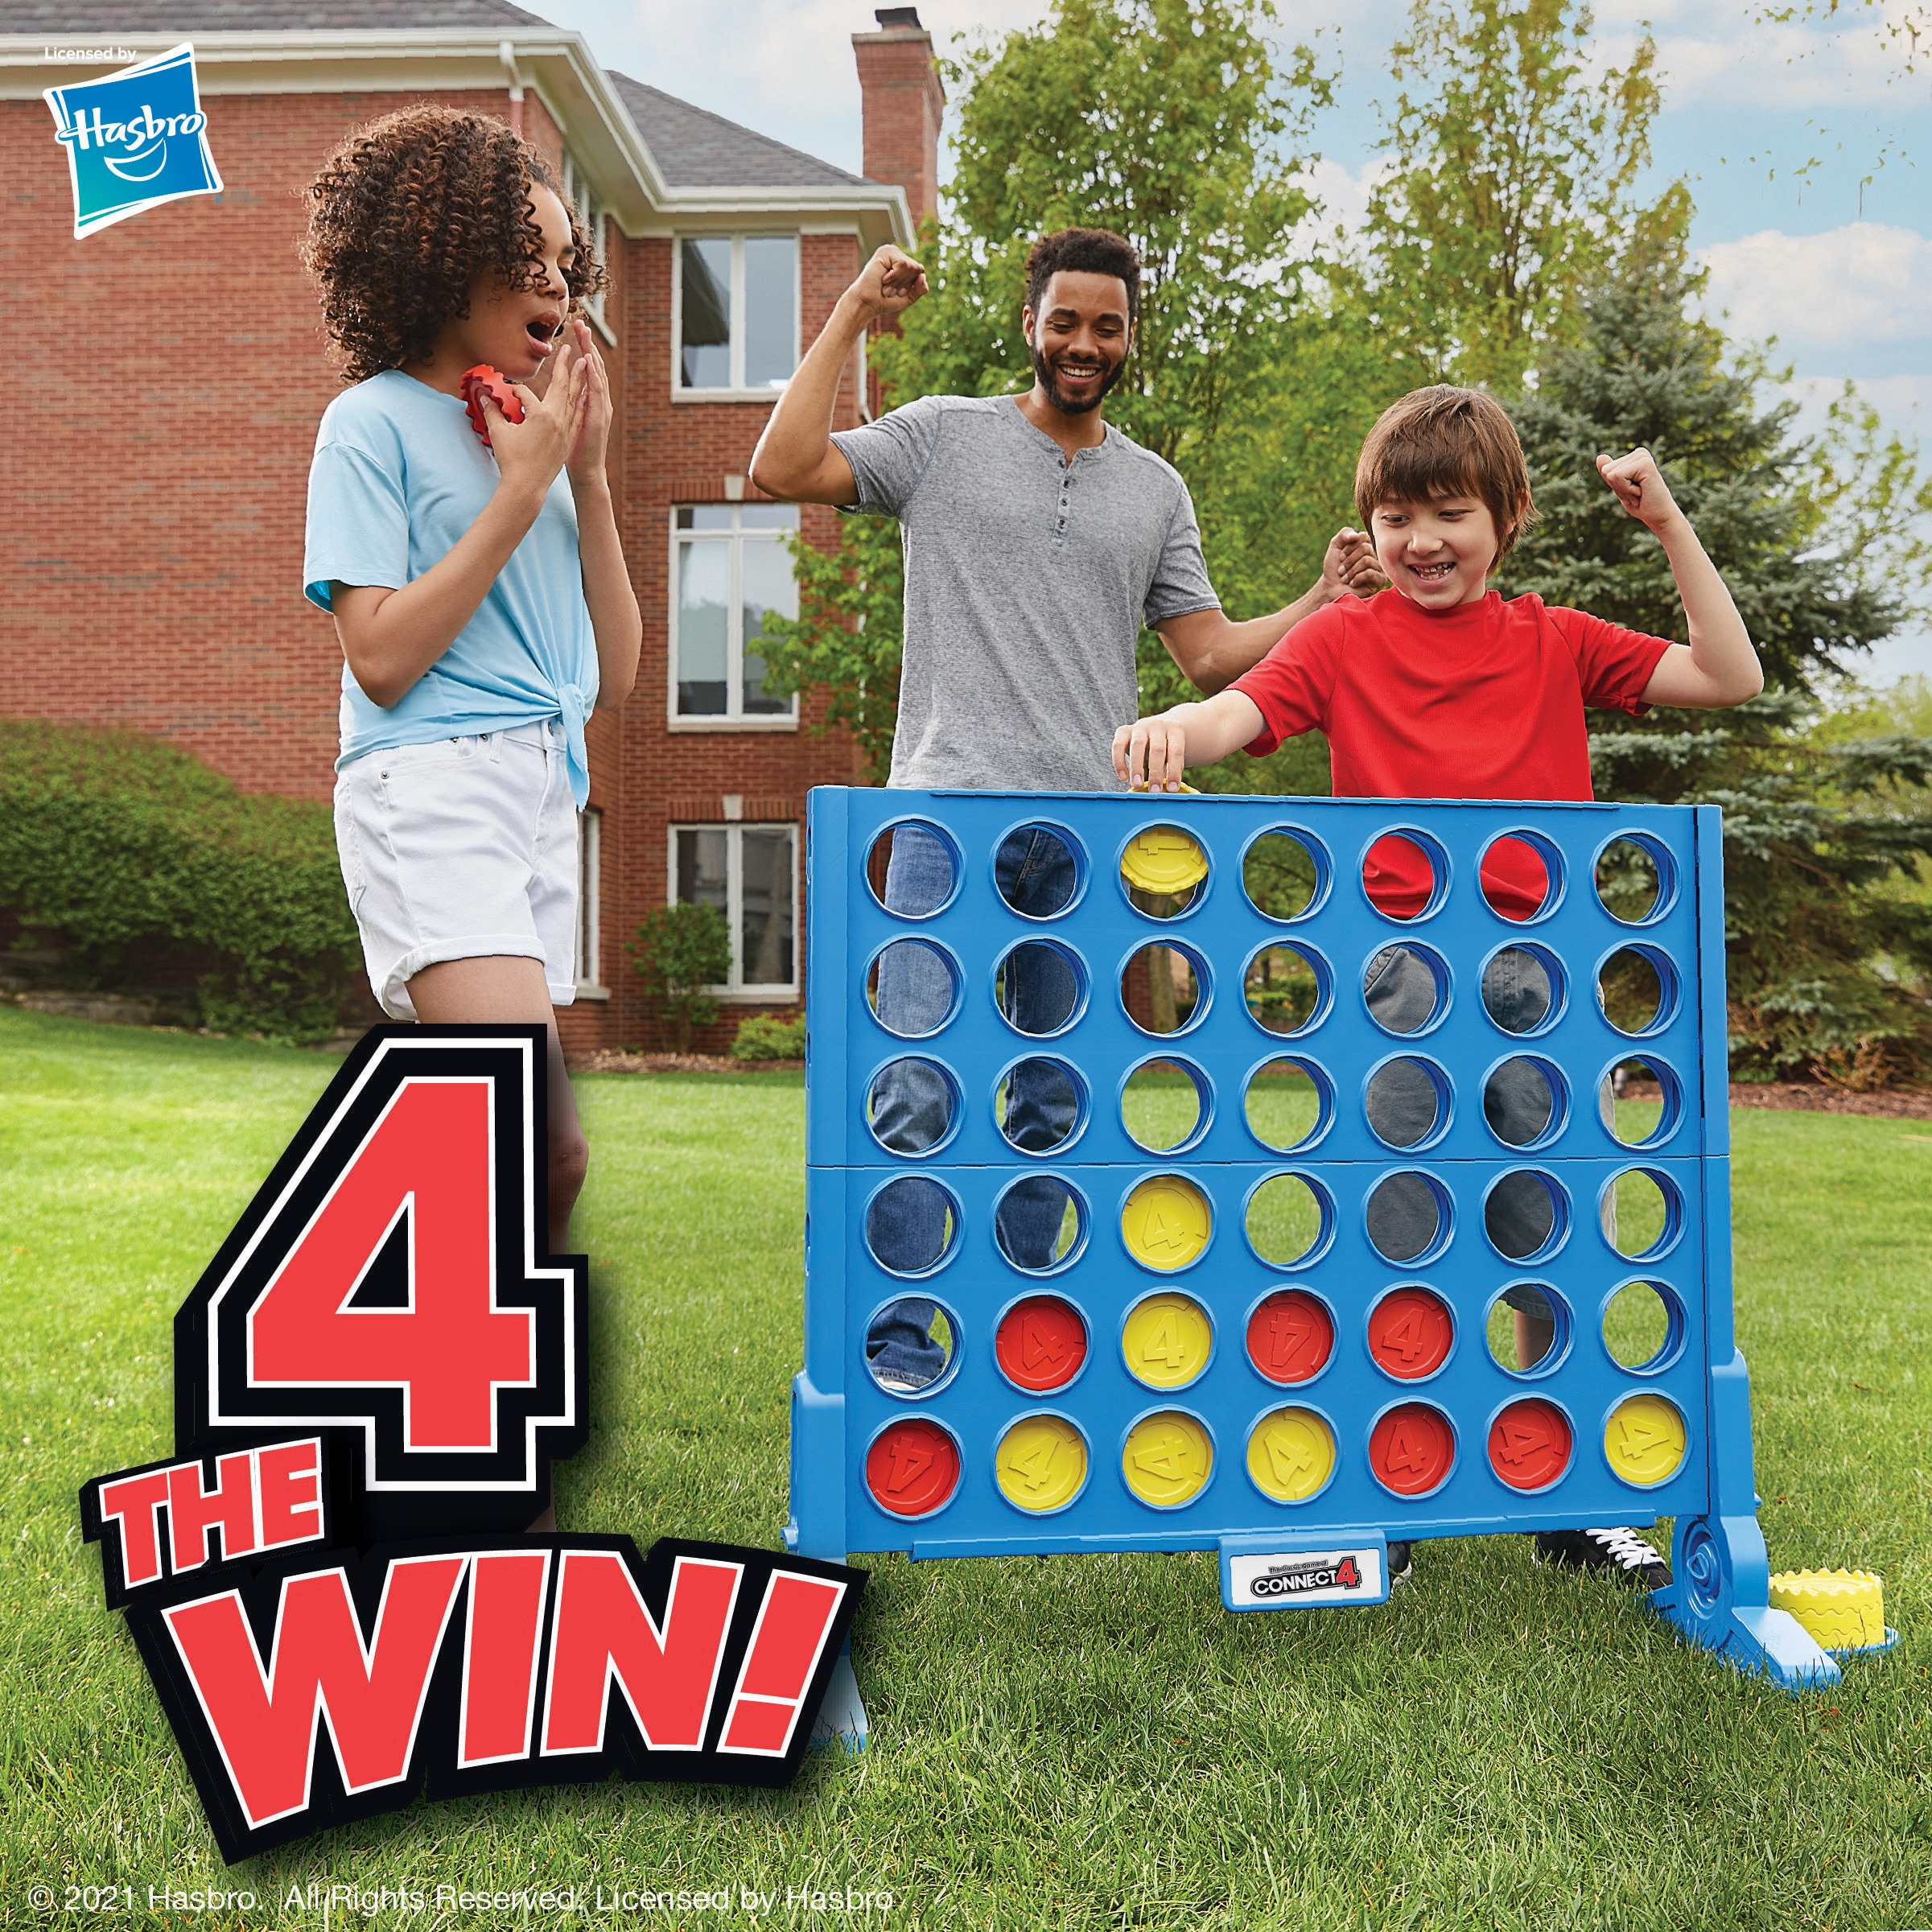 Connect 4 Game - Hasbro Games